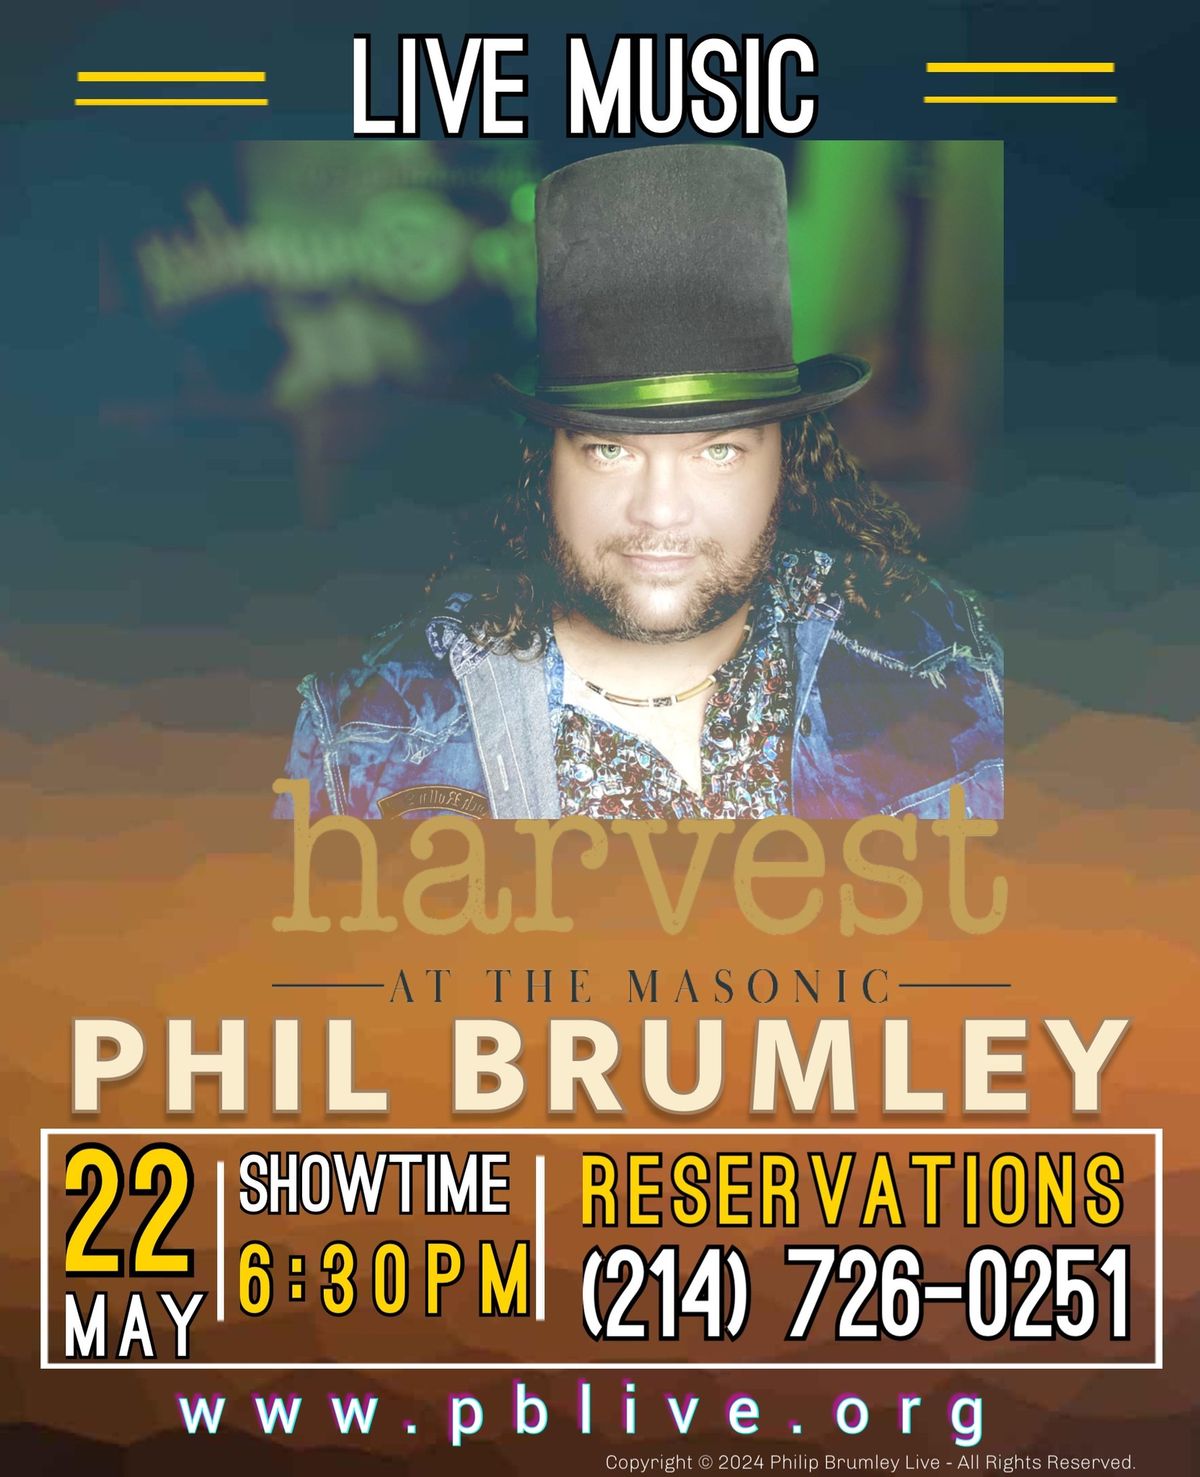 PHIL BRUMLEY LIVE | HARVEST AT THE MASONIC